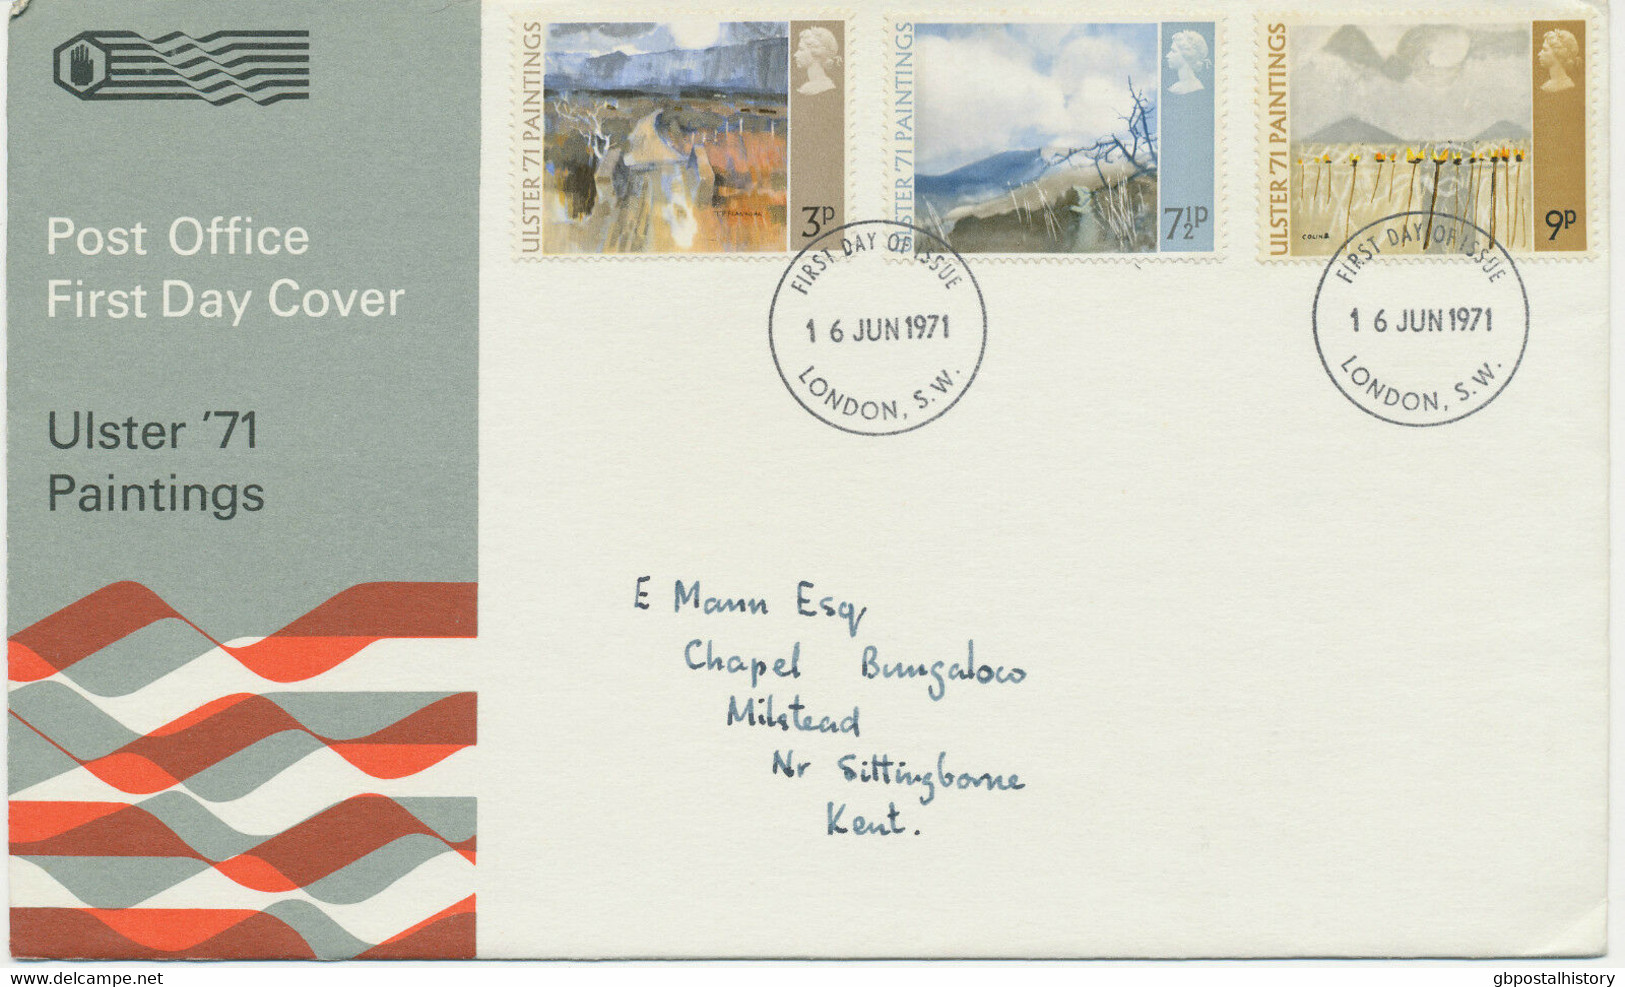 GB 1971, Ulster Paintings On Very Fine FDC With FDI-CDS "LONDON, S.W." - 1971-80 Ediciones Decimal